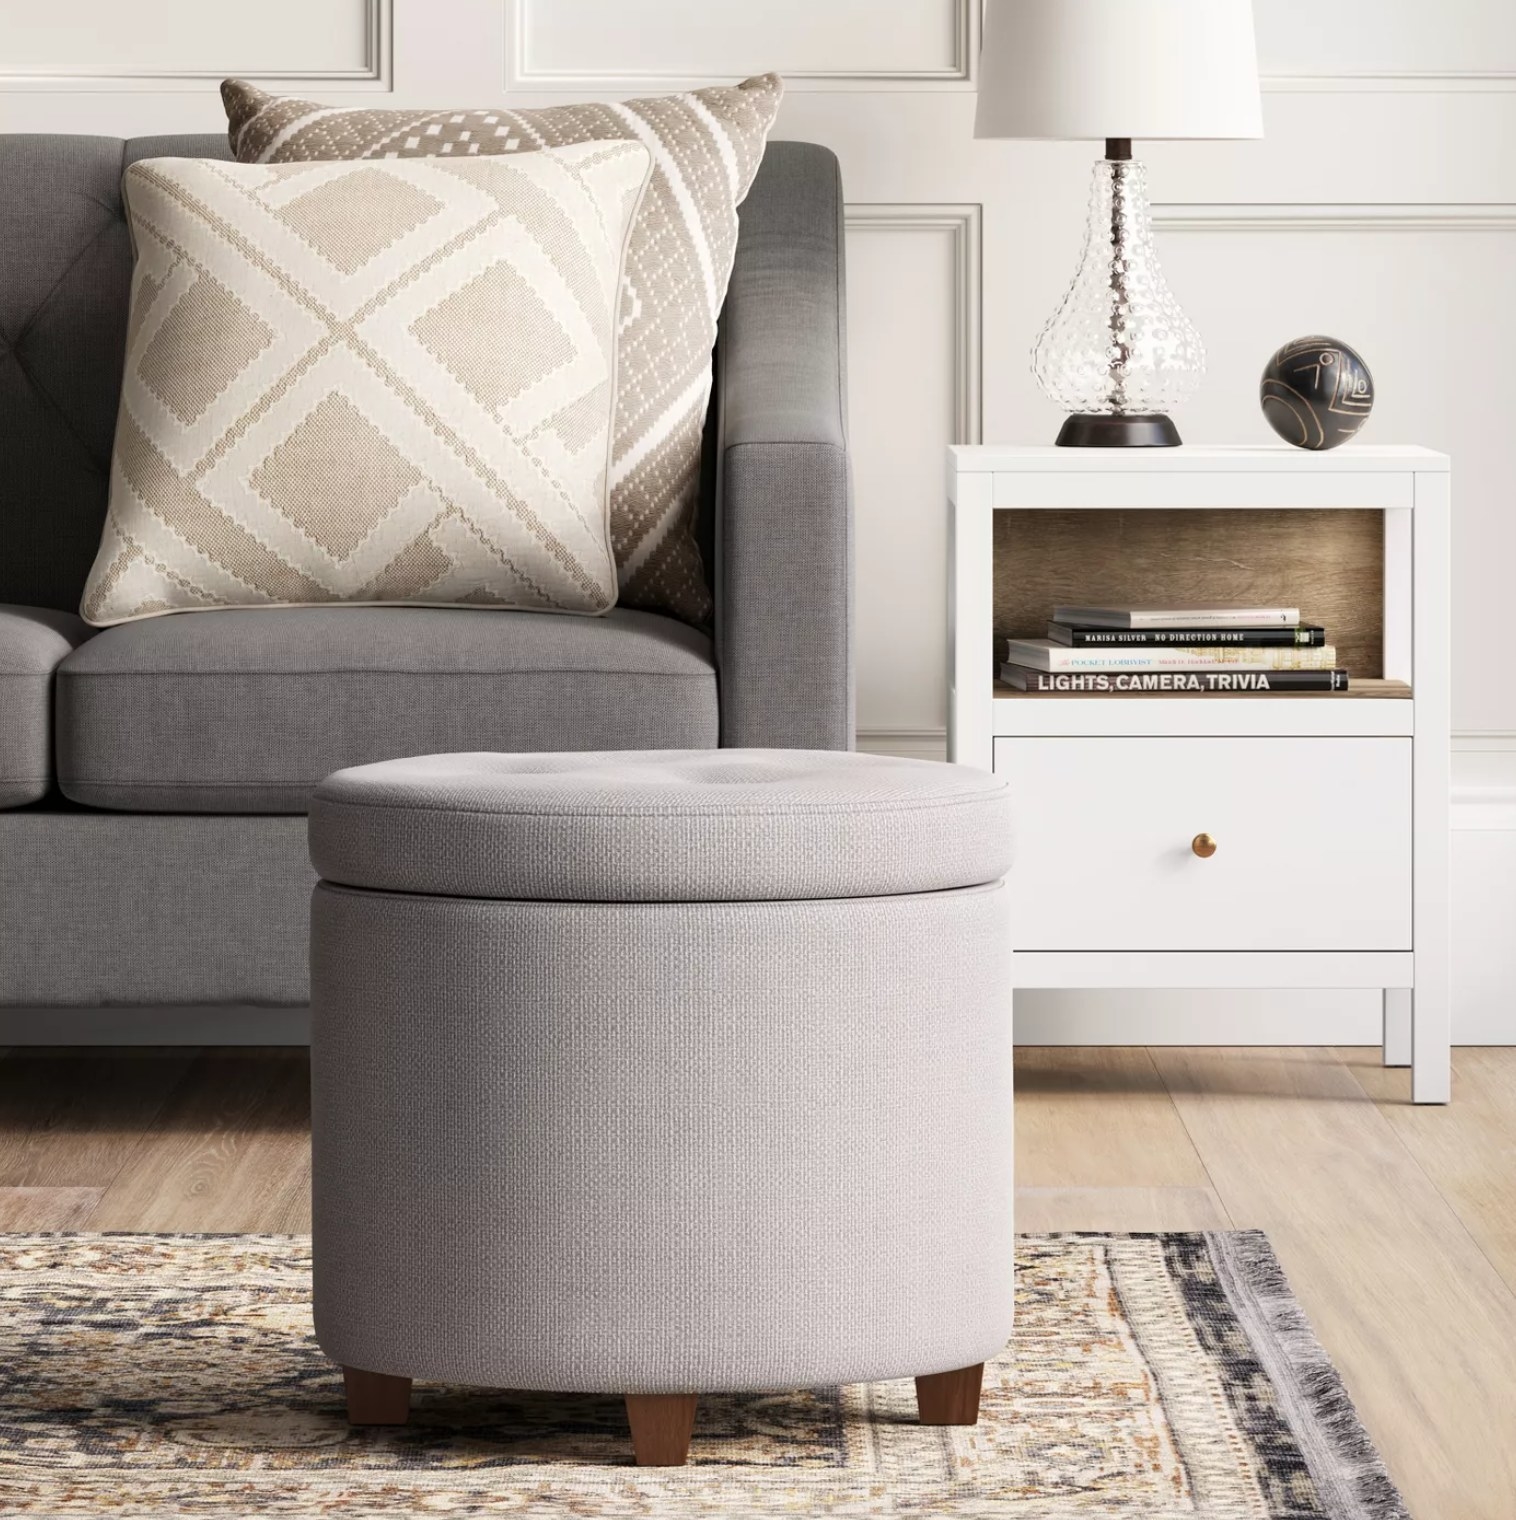 The round ottoman in grey 